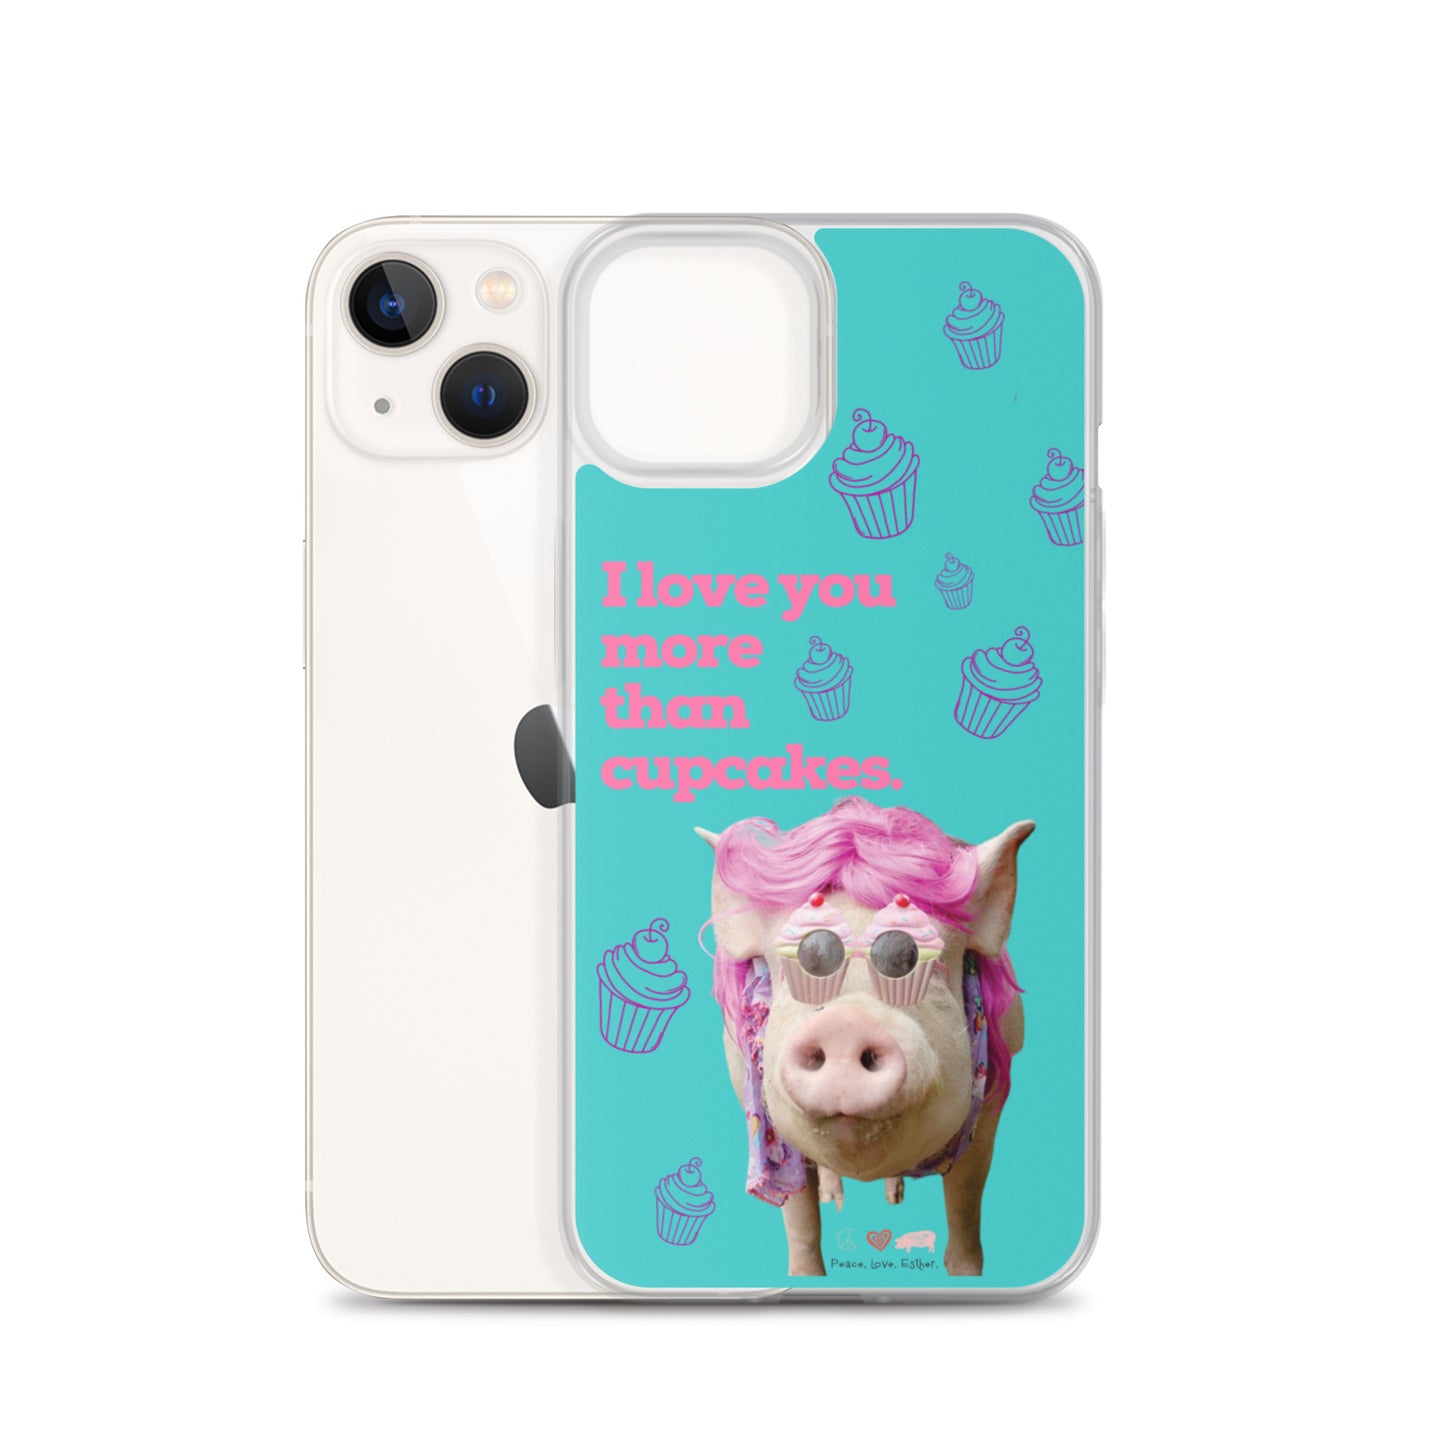 NEW-I Love you more than Cupcakes- iPhone Case